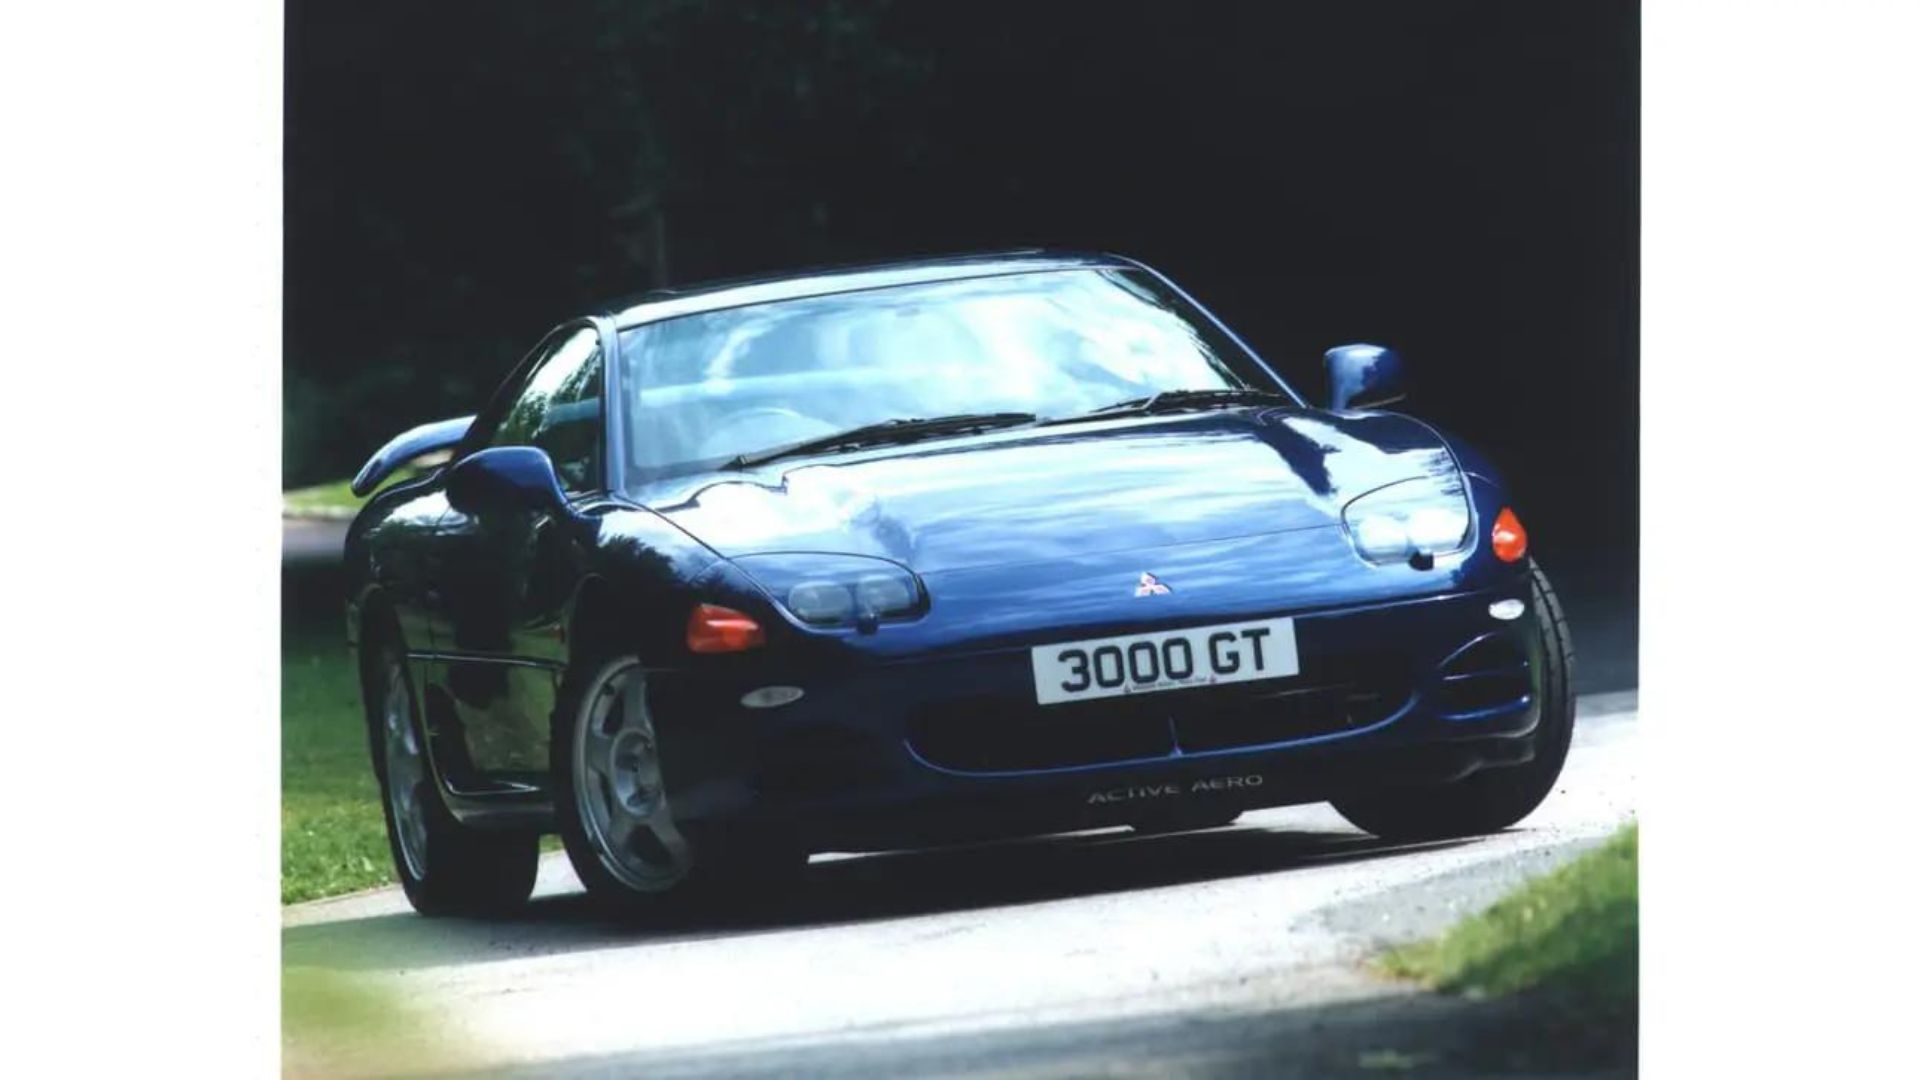 JDM legends that are bargains abroad: Mitsubishi 3000GT